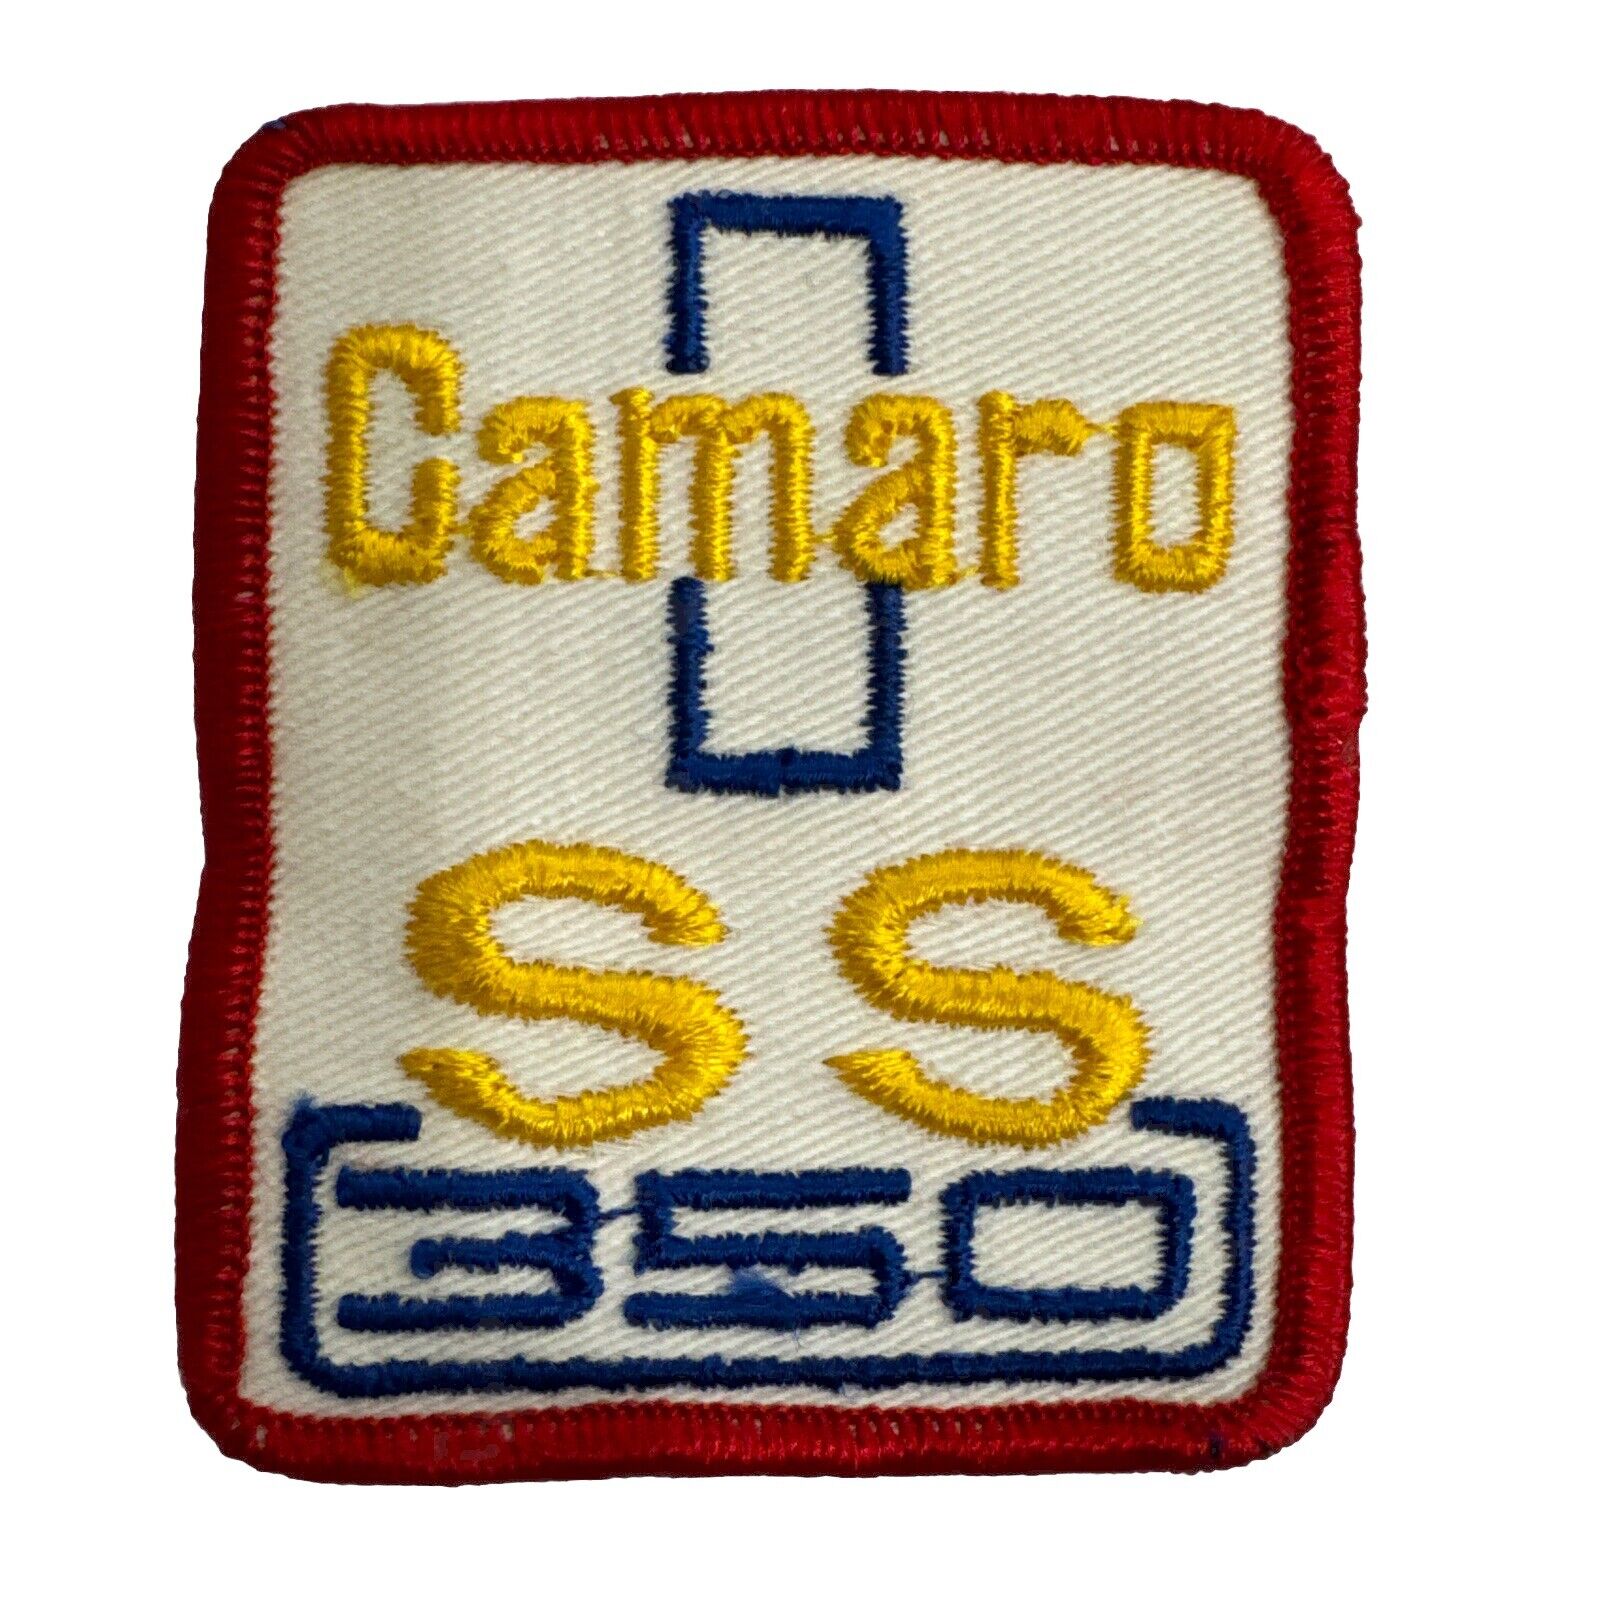 Vintage Automobile Related Camaro SS 350 Patch NOS 2-1/2”x3”